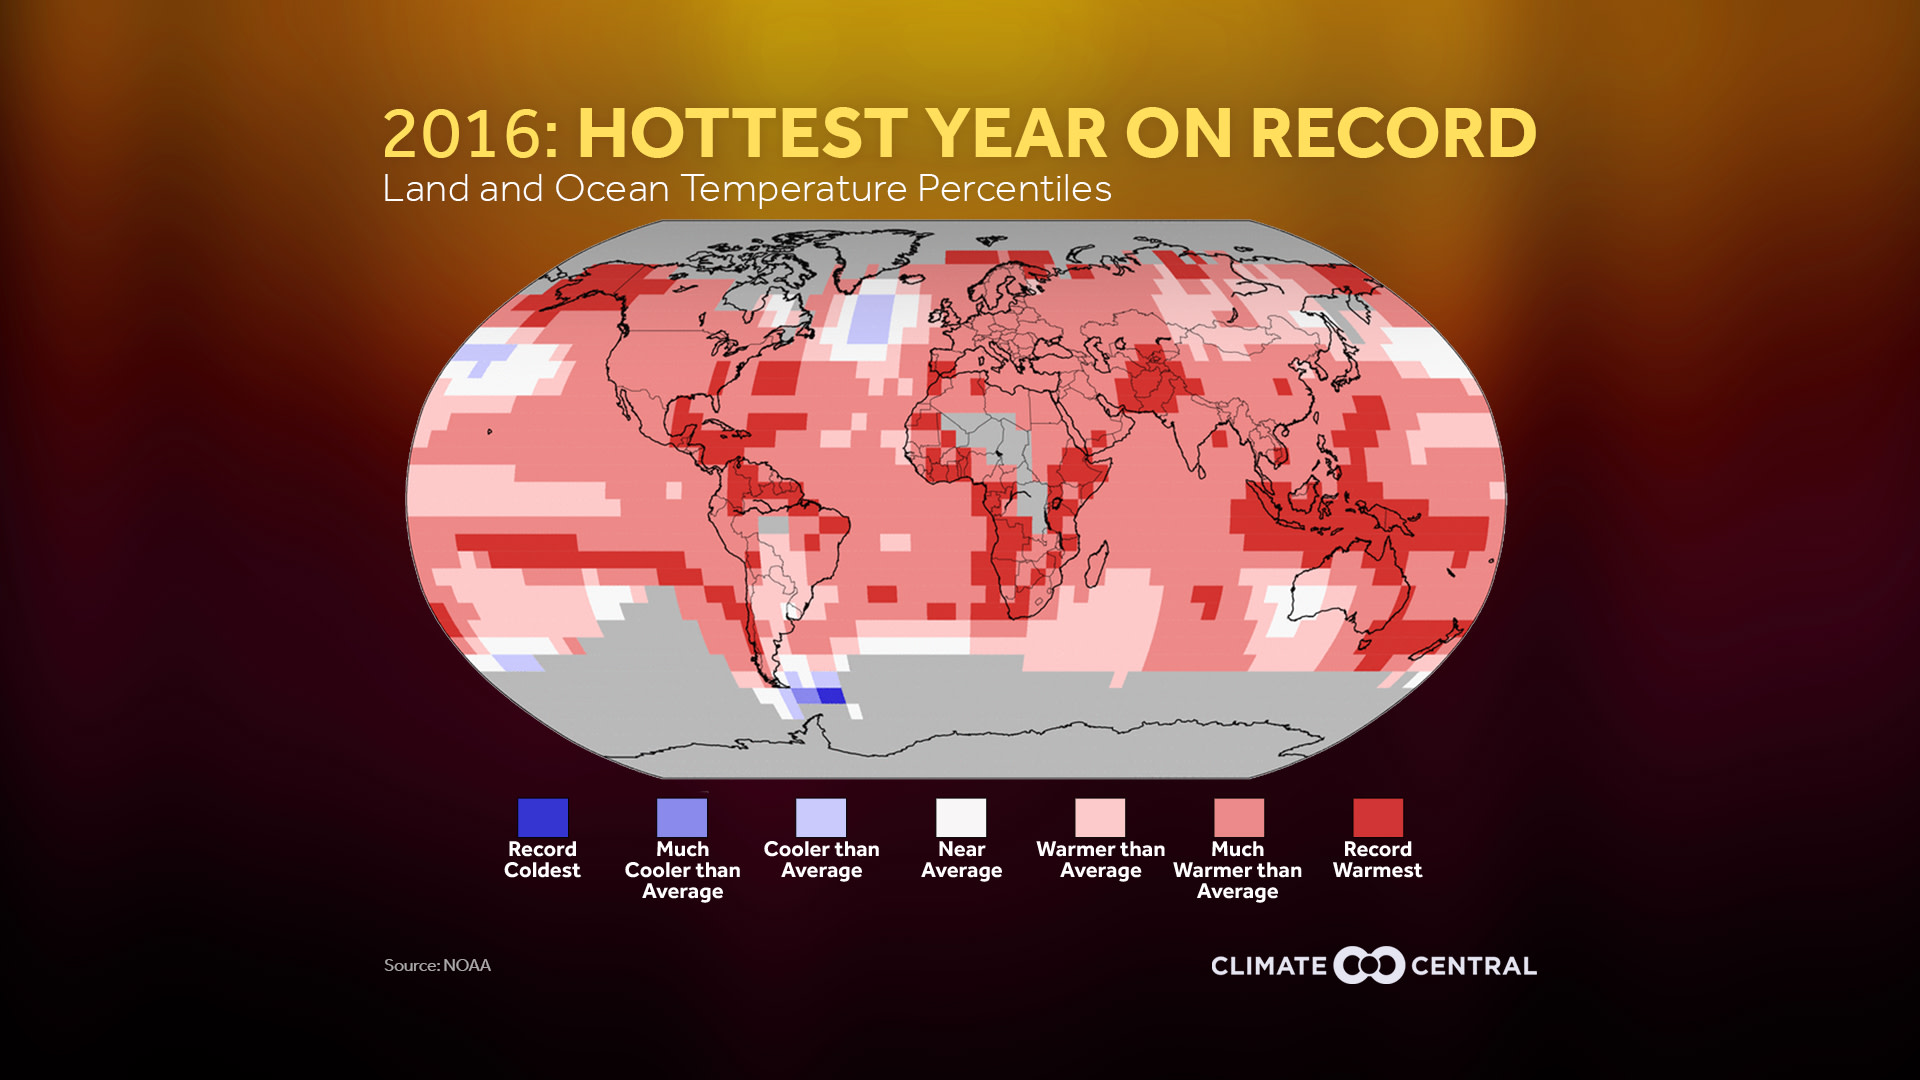 Set 4 - 2016: Hottest Year on Record